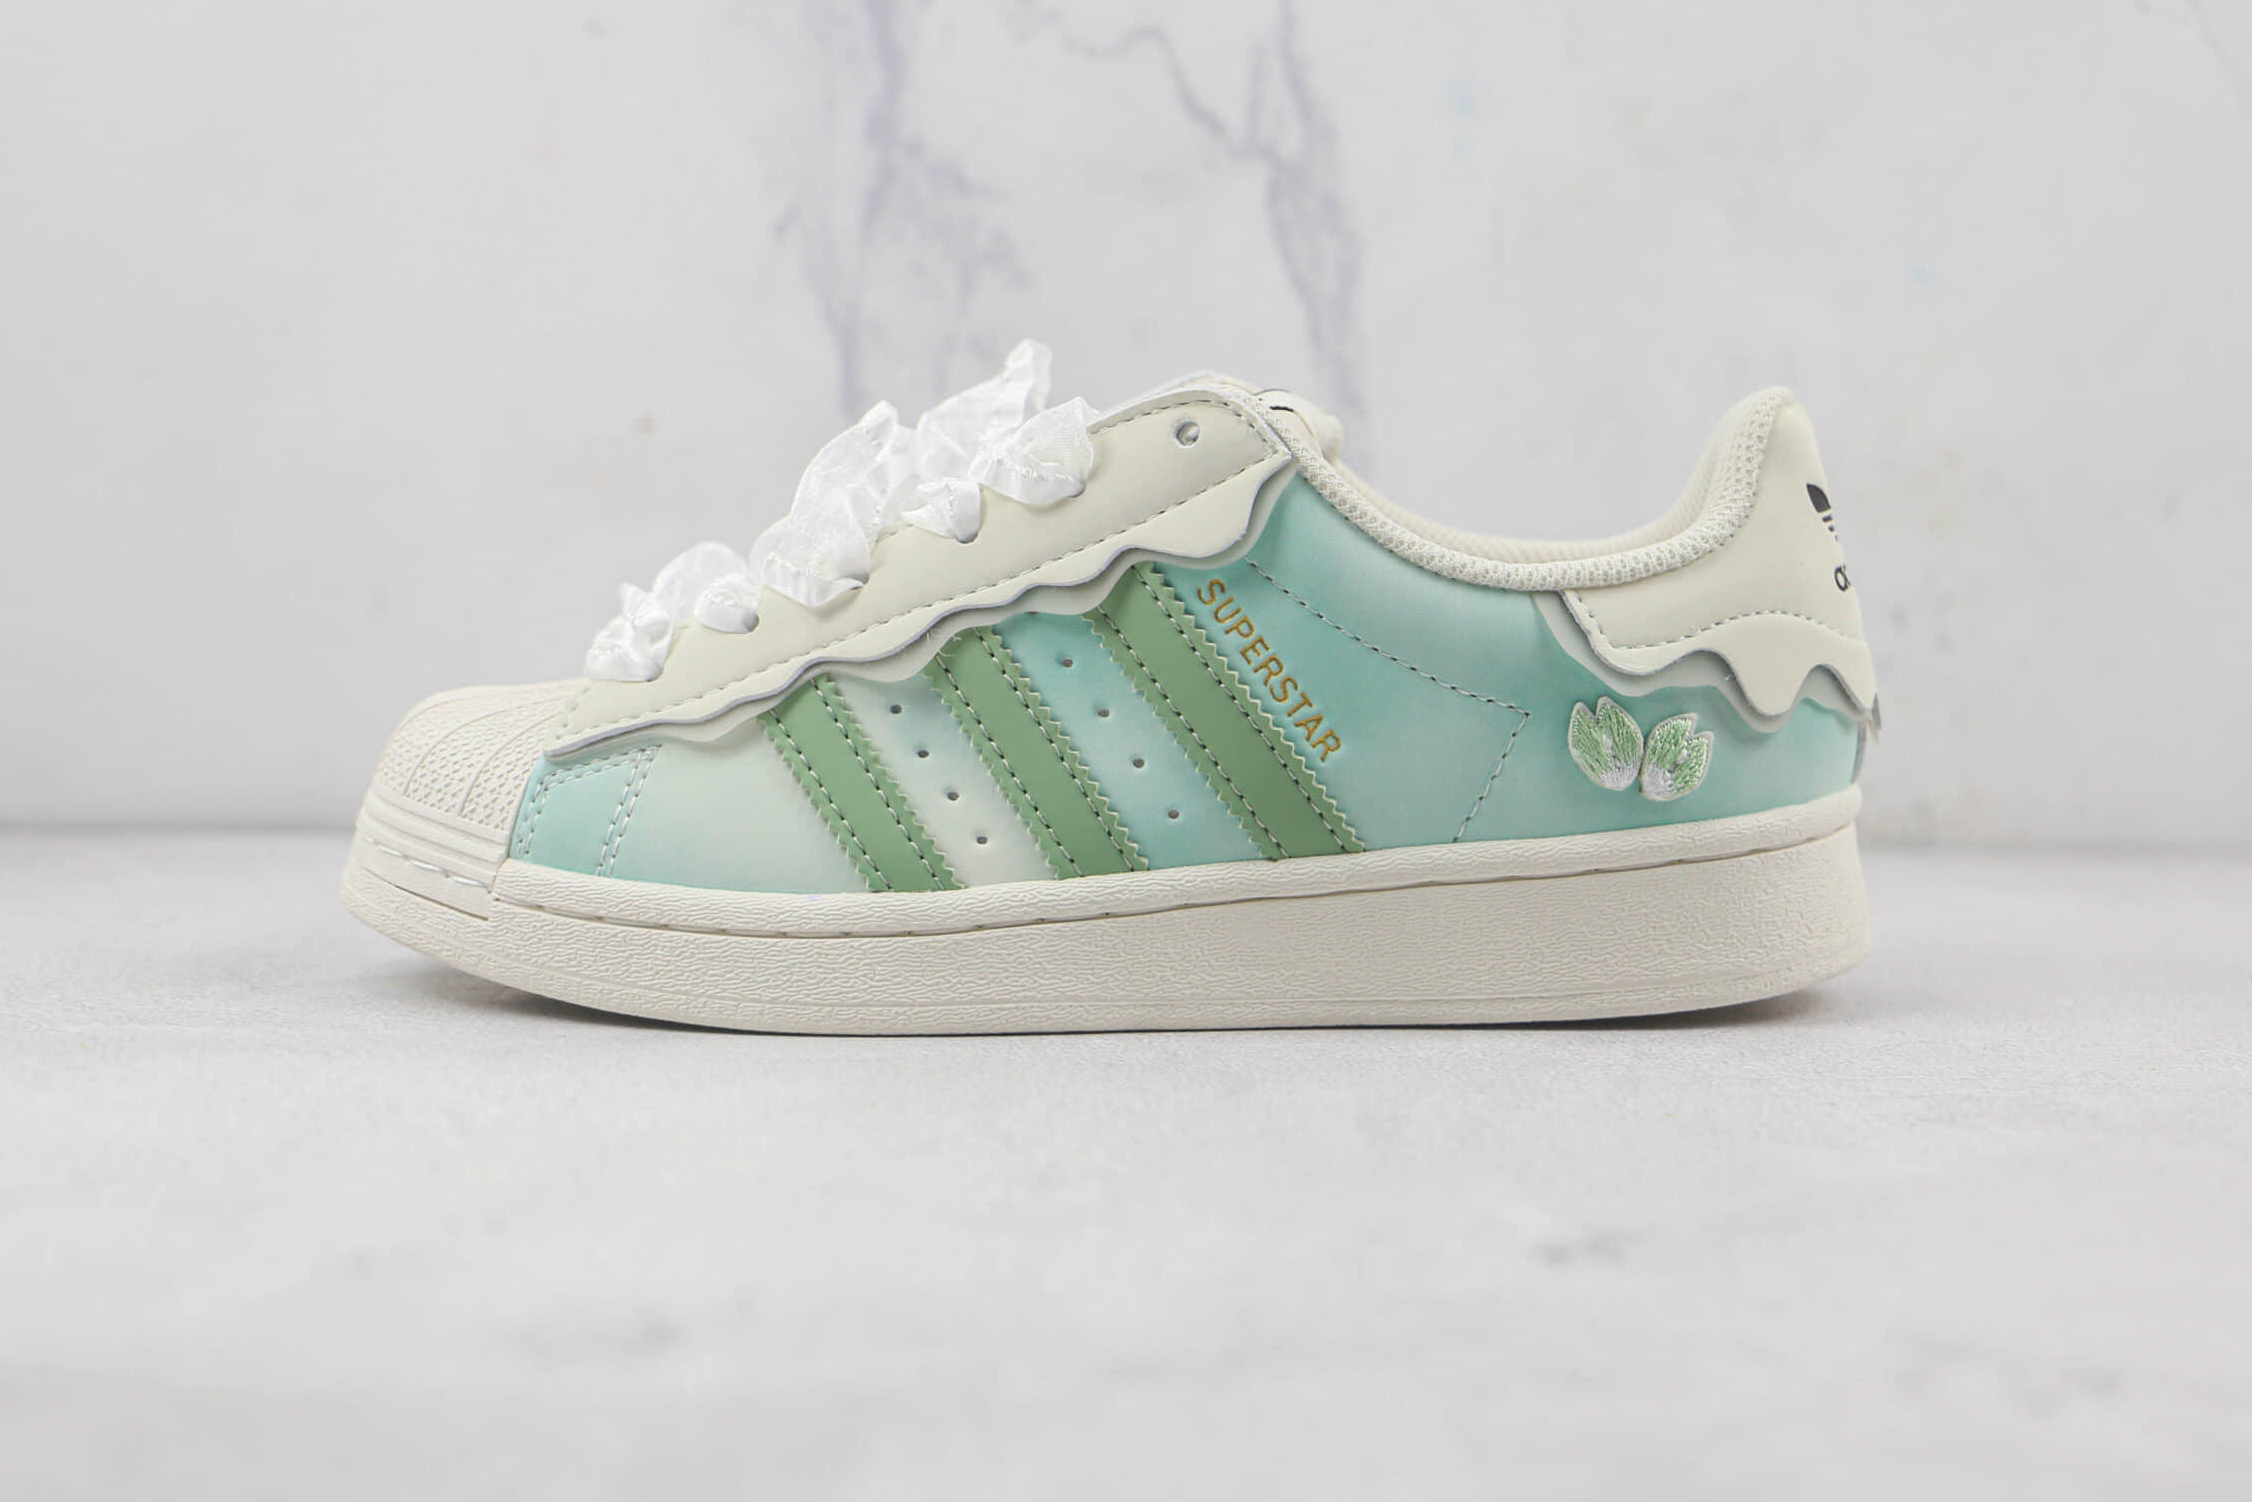 Adidas Originals Superstar Sail Green Lace - Classic Style with a Modern Twist